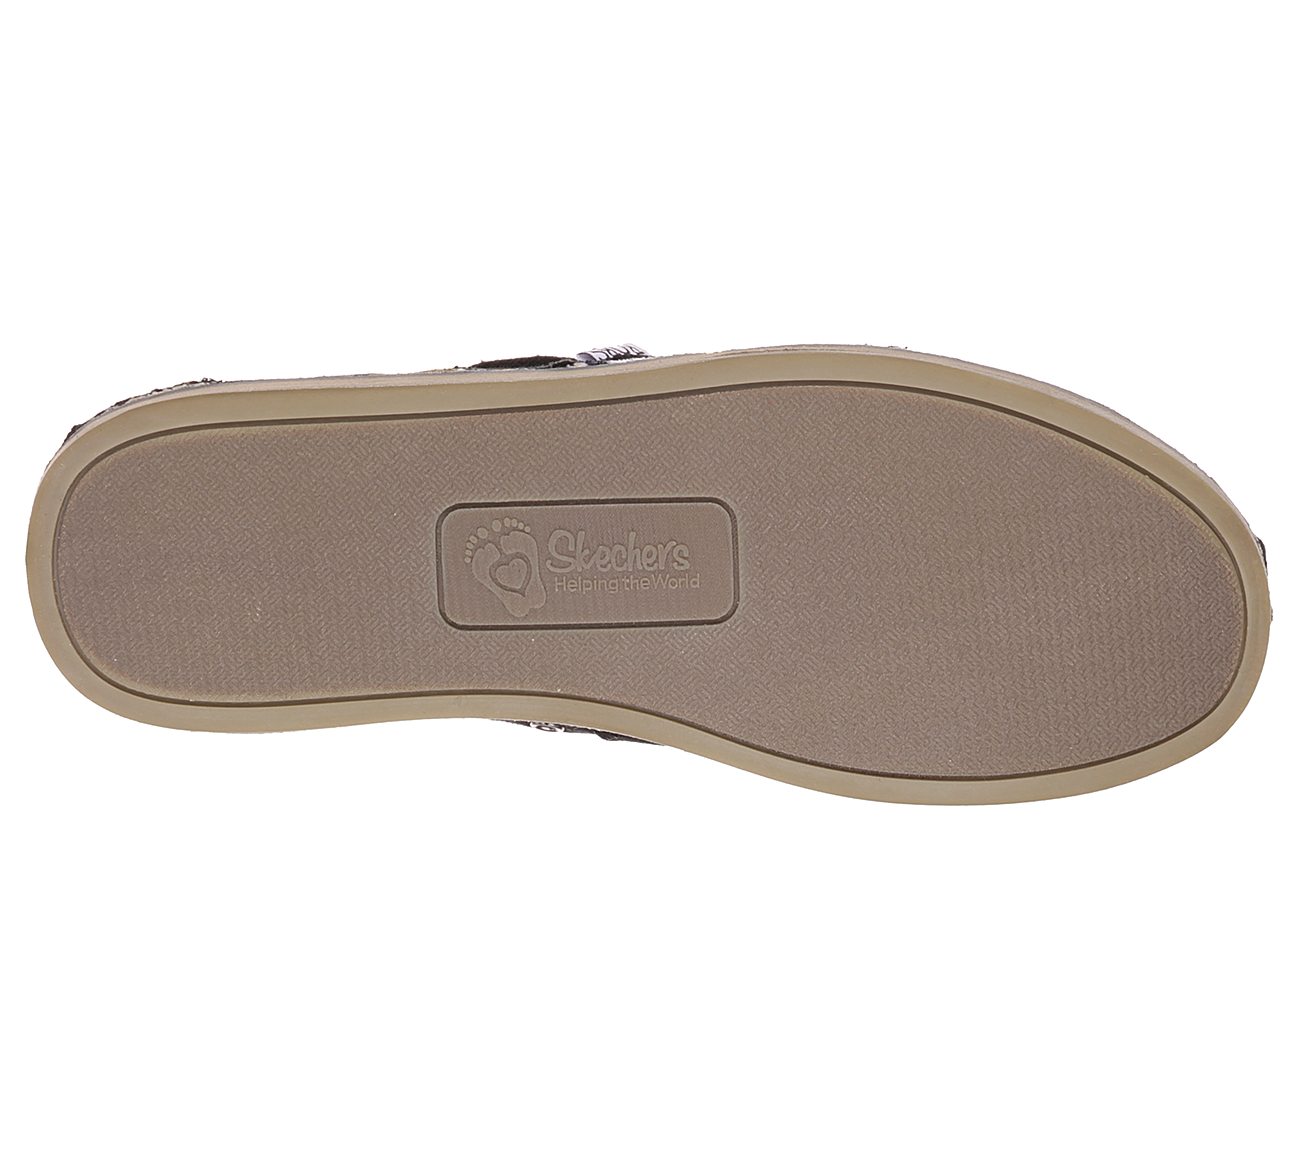 Buy SKECHERS Bobs Chill - Rowboat 